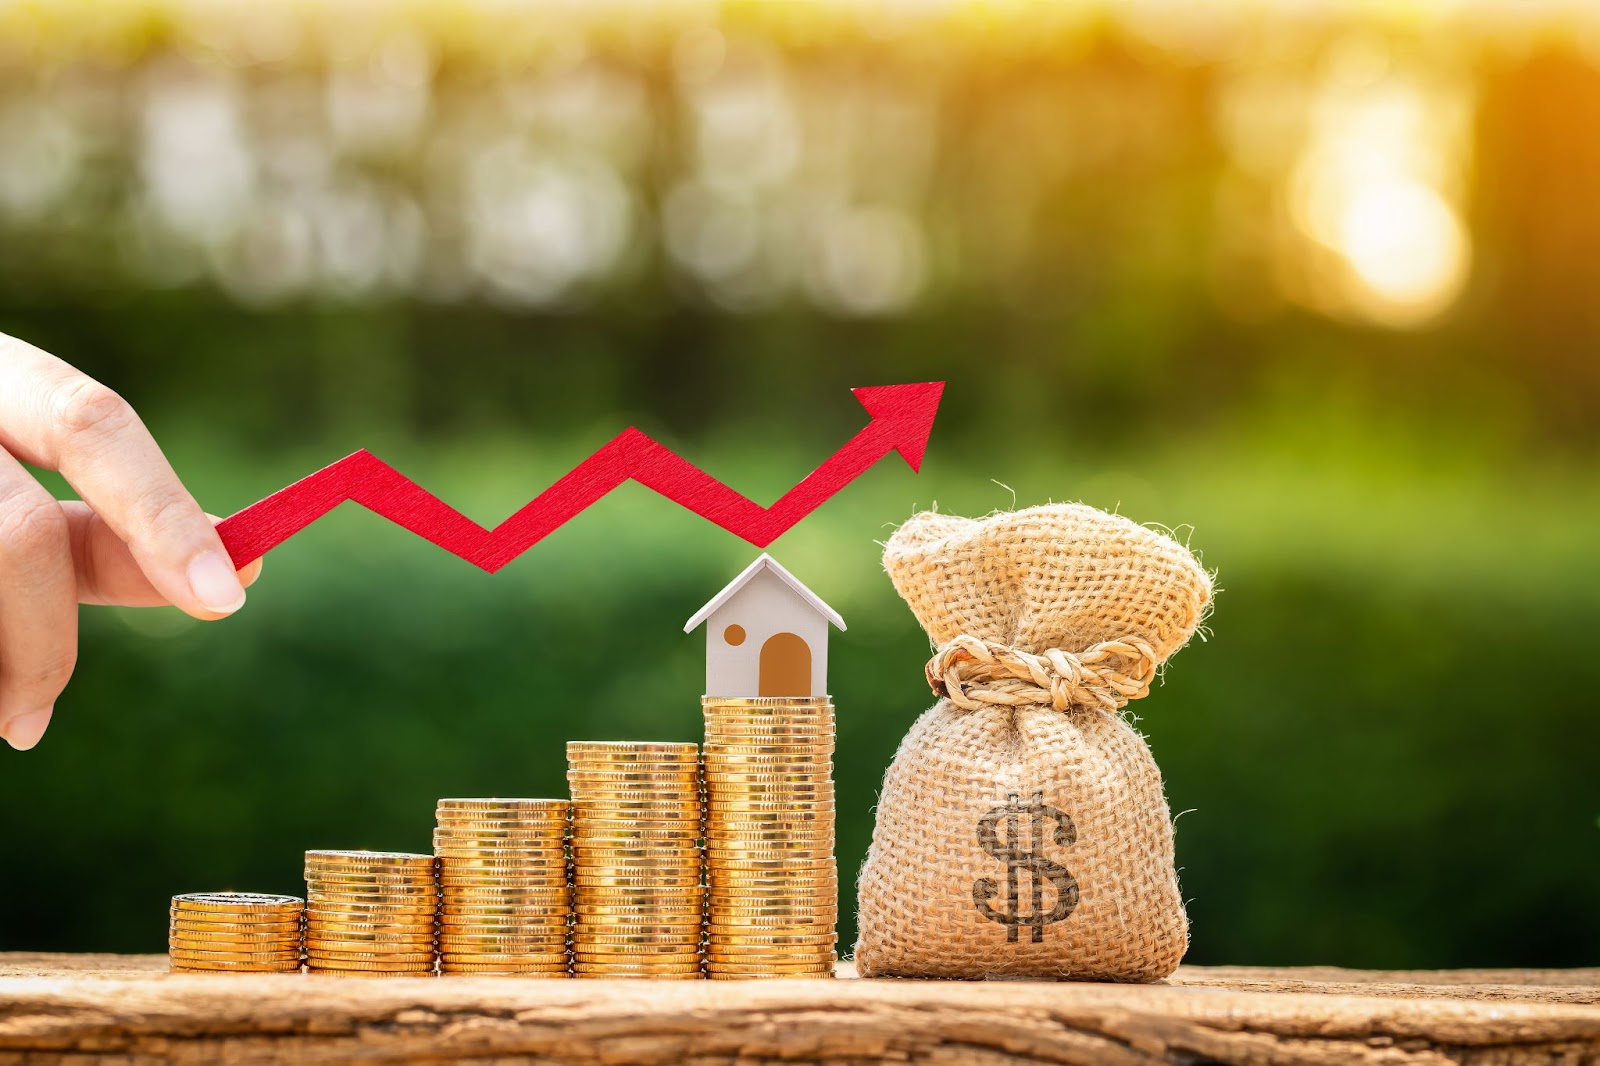 A guide to investing in Canadian real estate stocks